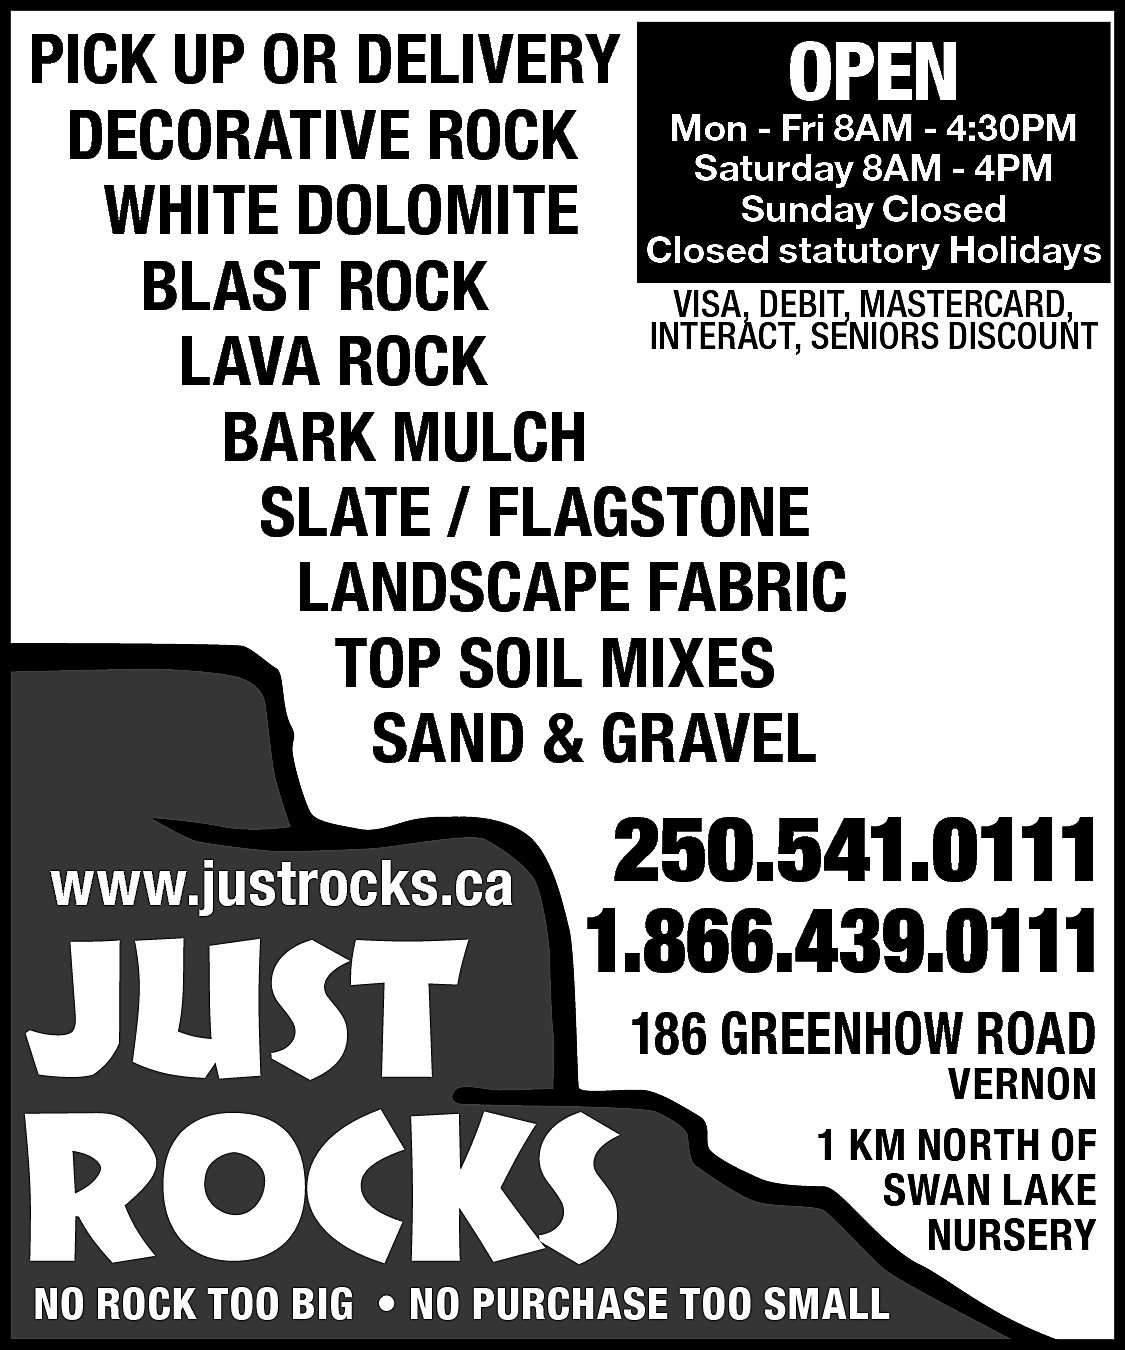 PICK UP OR DELIVERY <br>OPEN  PICK UP OR DELIVERY  OPEN  - Fri 8AM - 4:30PM  DECORATIVE ROCK Mon  Saturday 8AM - 4PM  Closed  WHITE DOLOMITE ClosedSunday  statutory Holidays  BLAST ROCK  VISA, DEBIT, MASTERCARD,  INTERACT, SENIORS DISCOUNT  LAVA ROCK  BARK MULCH  SLATE / FLAGSTONE  LANDSCAPE FABRIC  TOP SOIL MIXES  SAND & GRAVEL  www.justrocks.ca    JUST    250.541.0111  1.866.439.0111    ROCKS    186 GREENHOW ROAD    VERNON  1 KM NORTH OF  SWAN LAKE  NURSERY    NO ROCK TOO BIG • NO PURCHASE TOO SMALL    